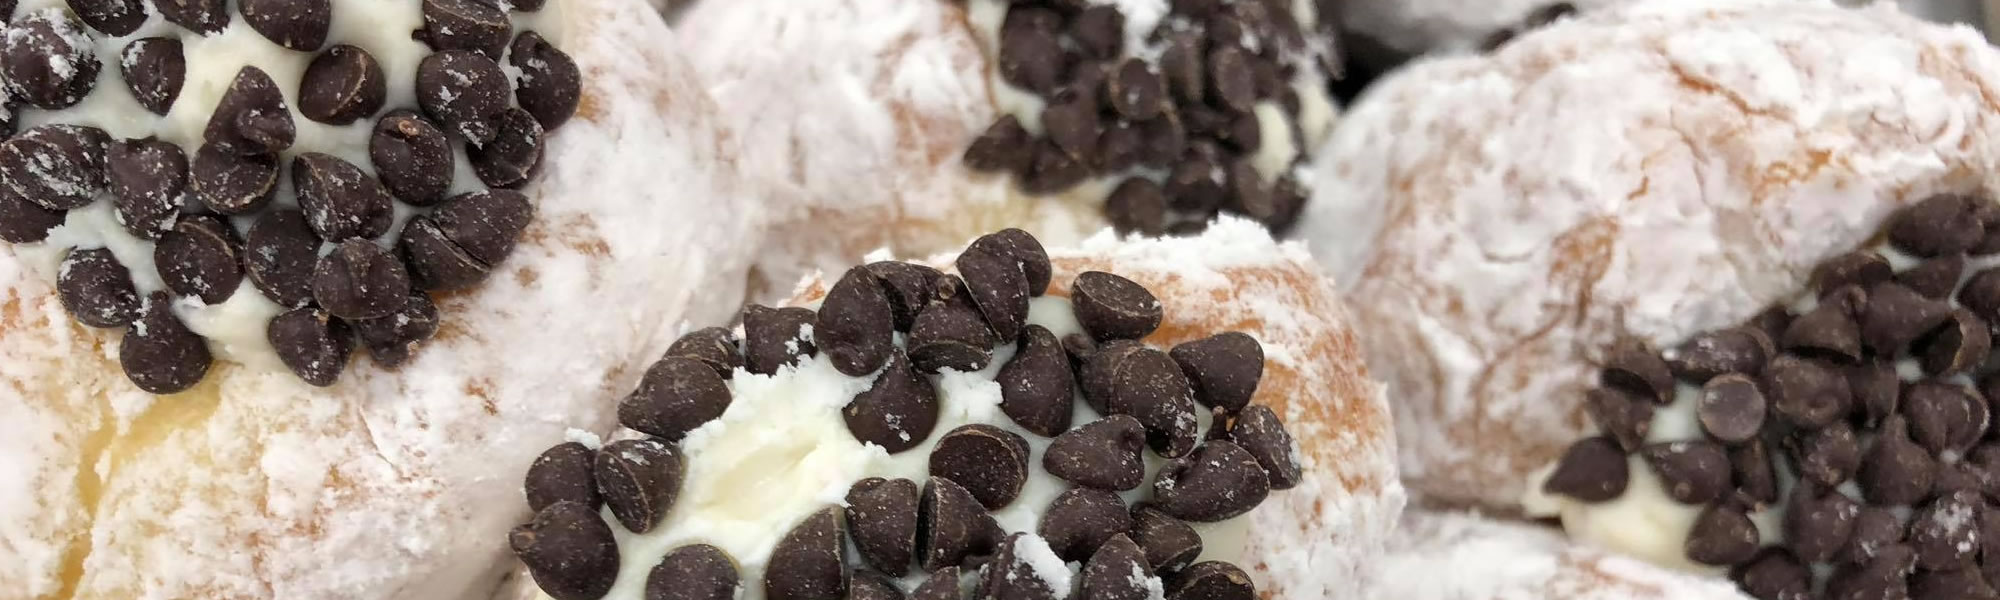 Melt-in-your-mouth baked goods, including this donut canoli sprinkled with chocolate chips, await you at the Hole in One in Eastham and Orleans, MA.